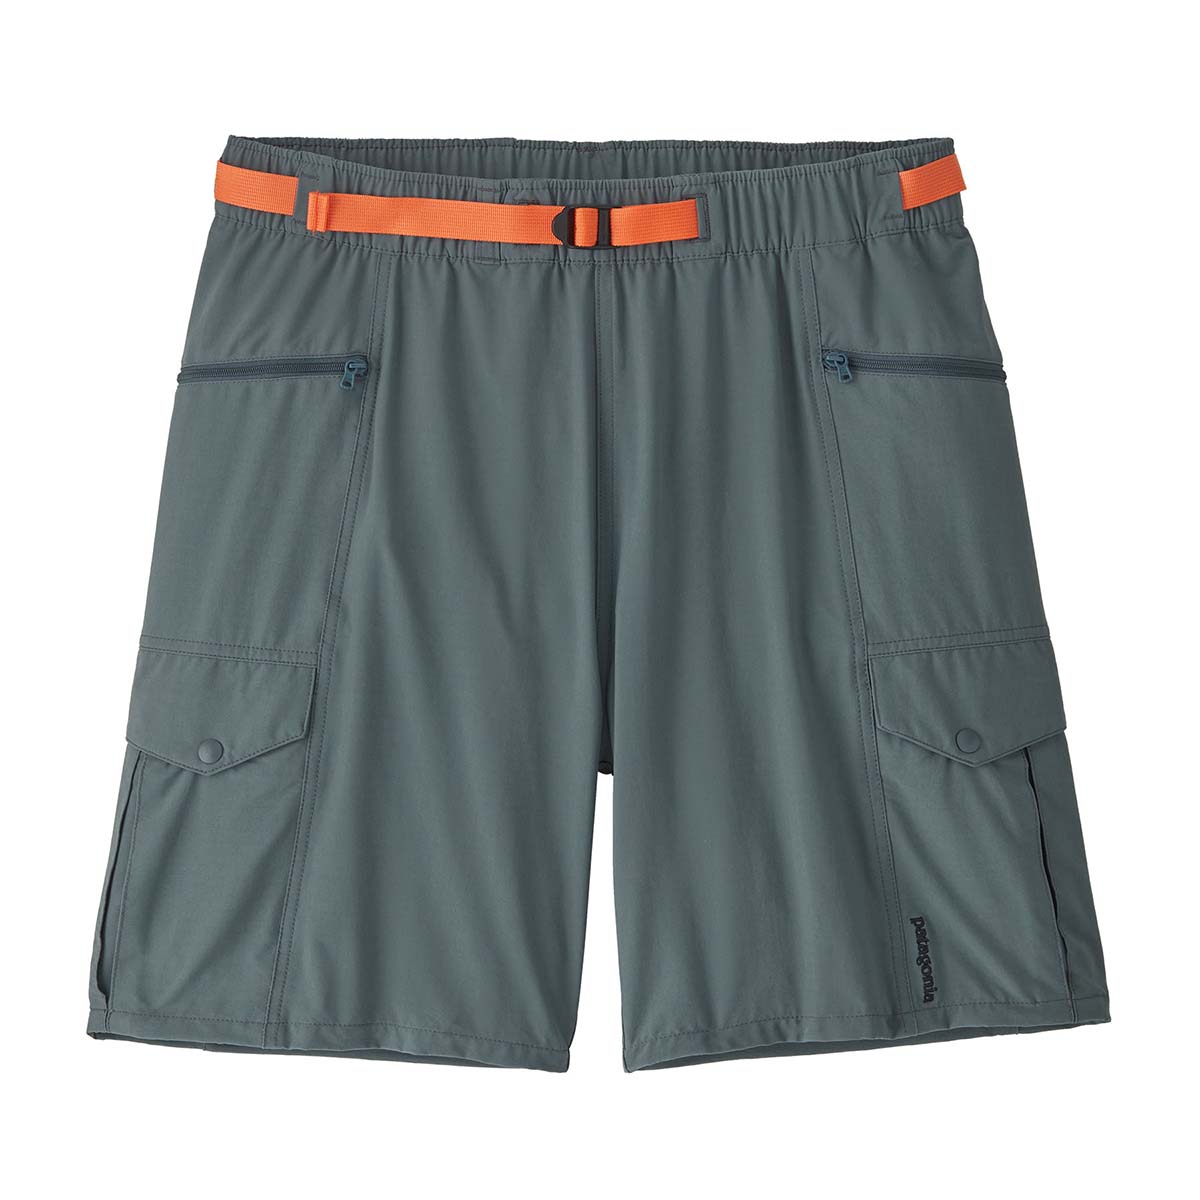 Patagonia Men's Outdoor Everyday Shorts - 7"